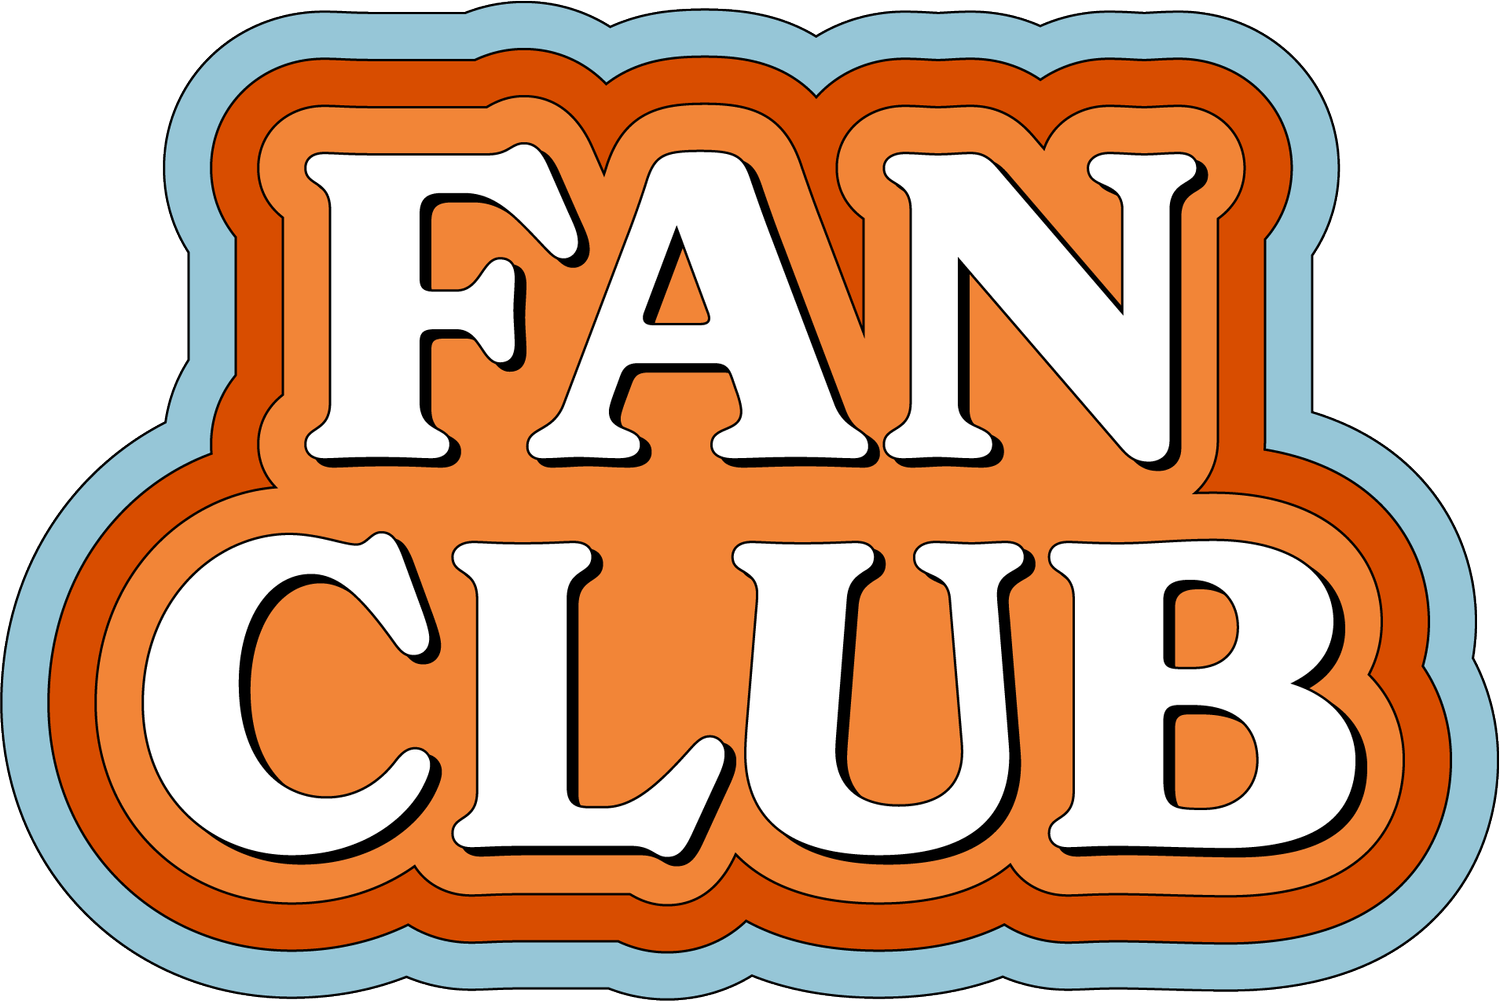 Fan Club Brands | Branding &amp; Web Design for Small Businesses